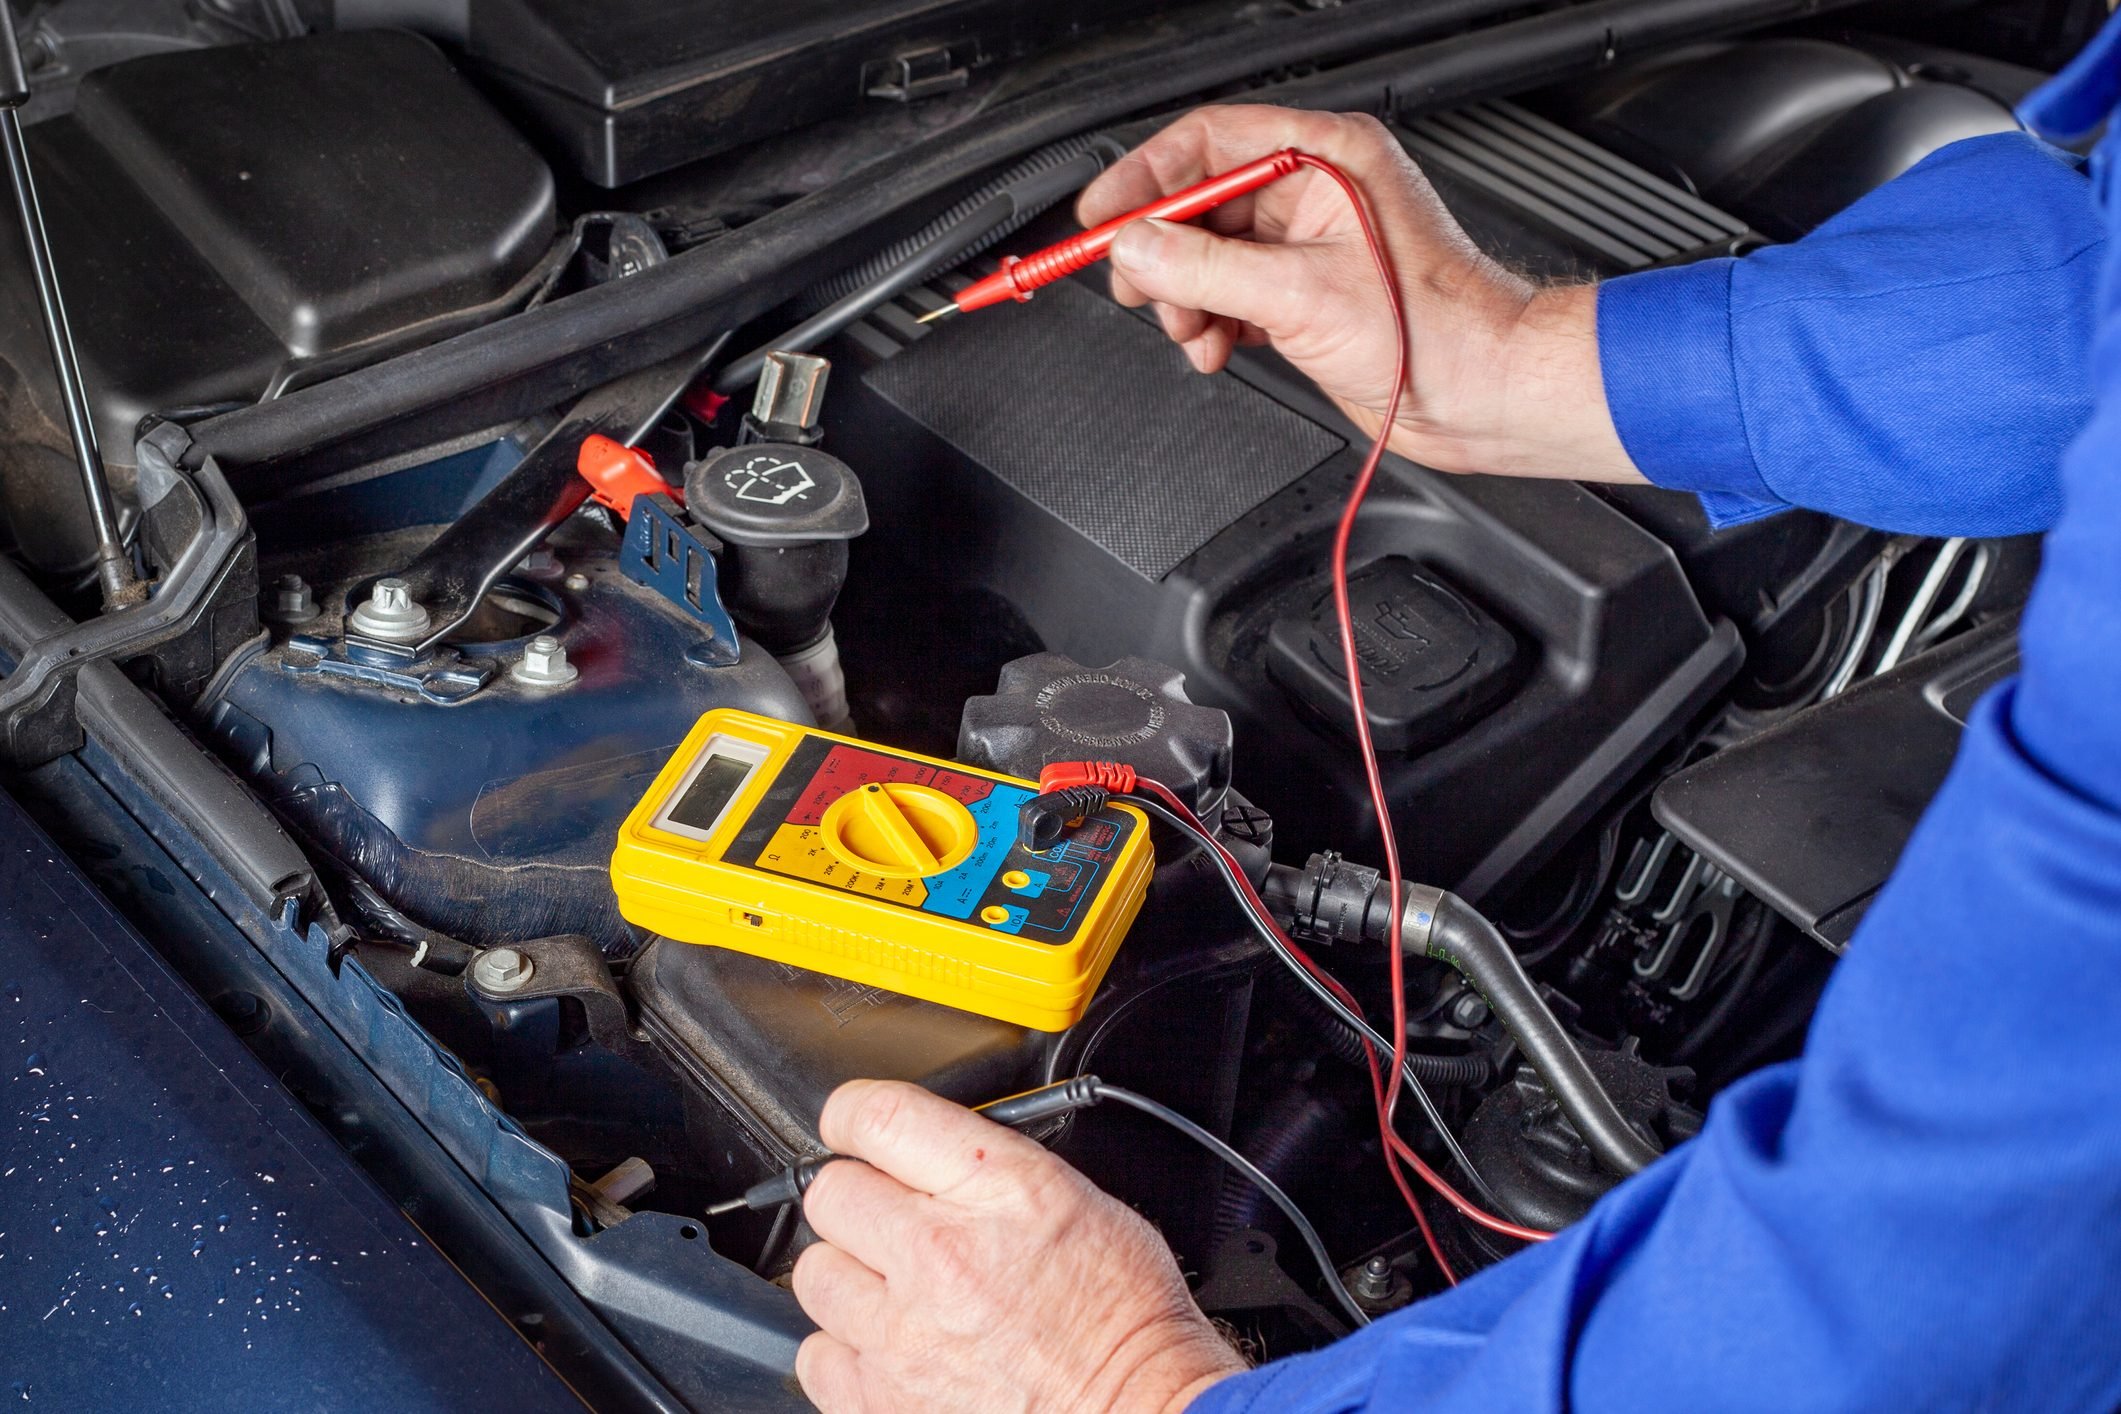 How To Test Your Car's Coolant With a Multimeter